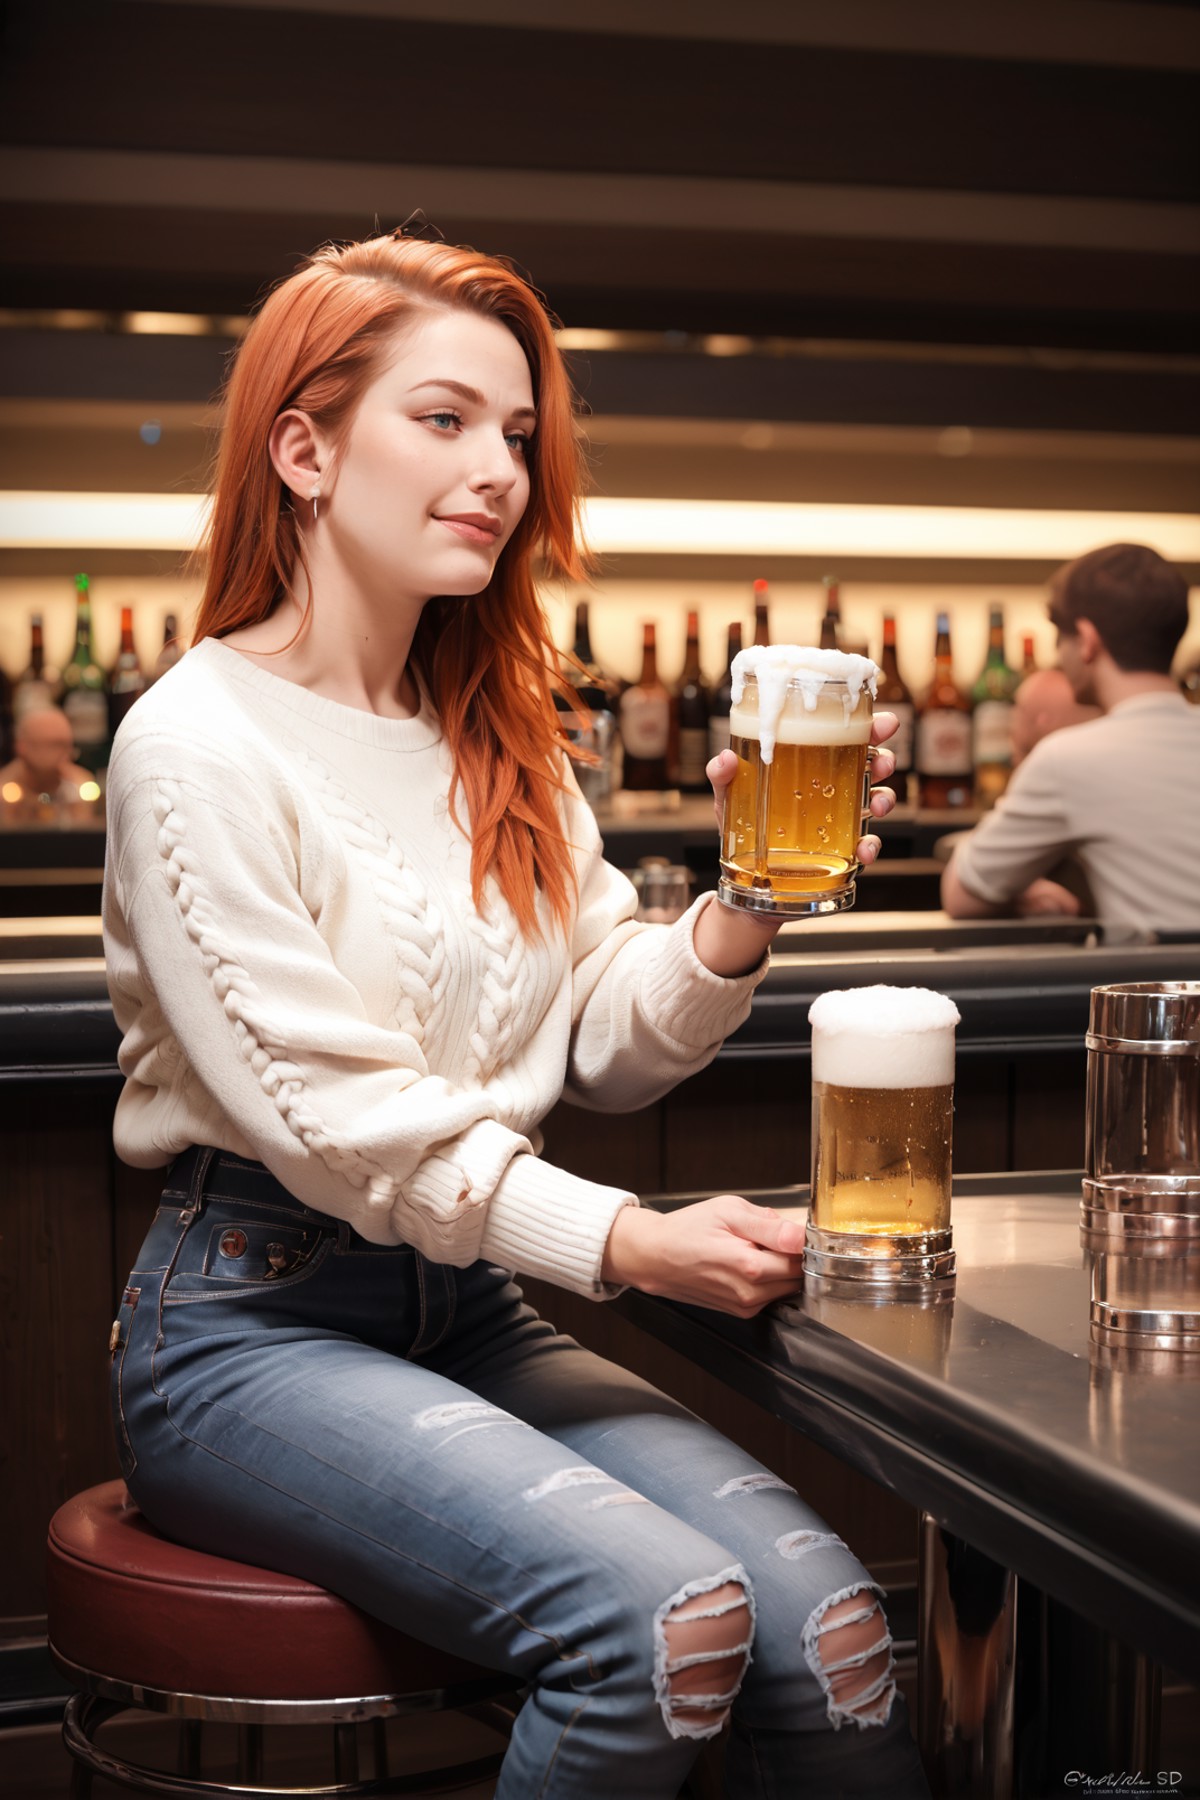 zPDXL, zPDXLpg, zPDXLrl, ginger woman with red hair in luxurious nightclub, sitting at the bar holding a beer, wearing a s...